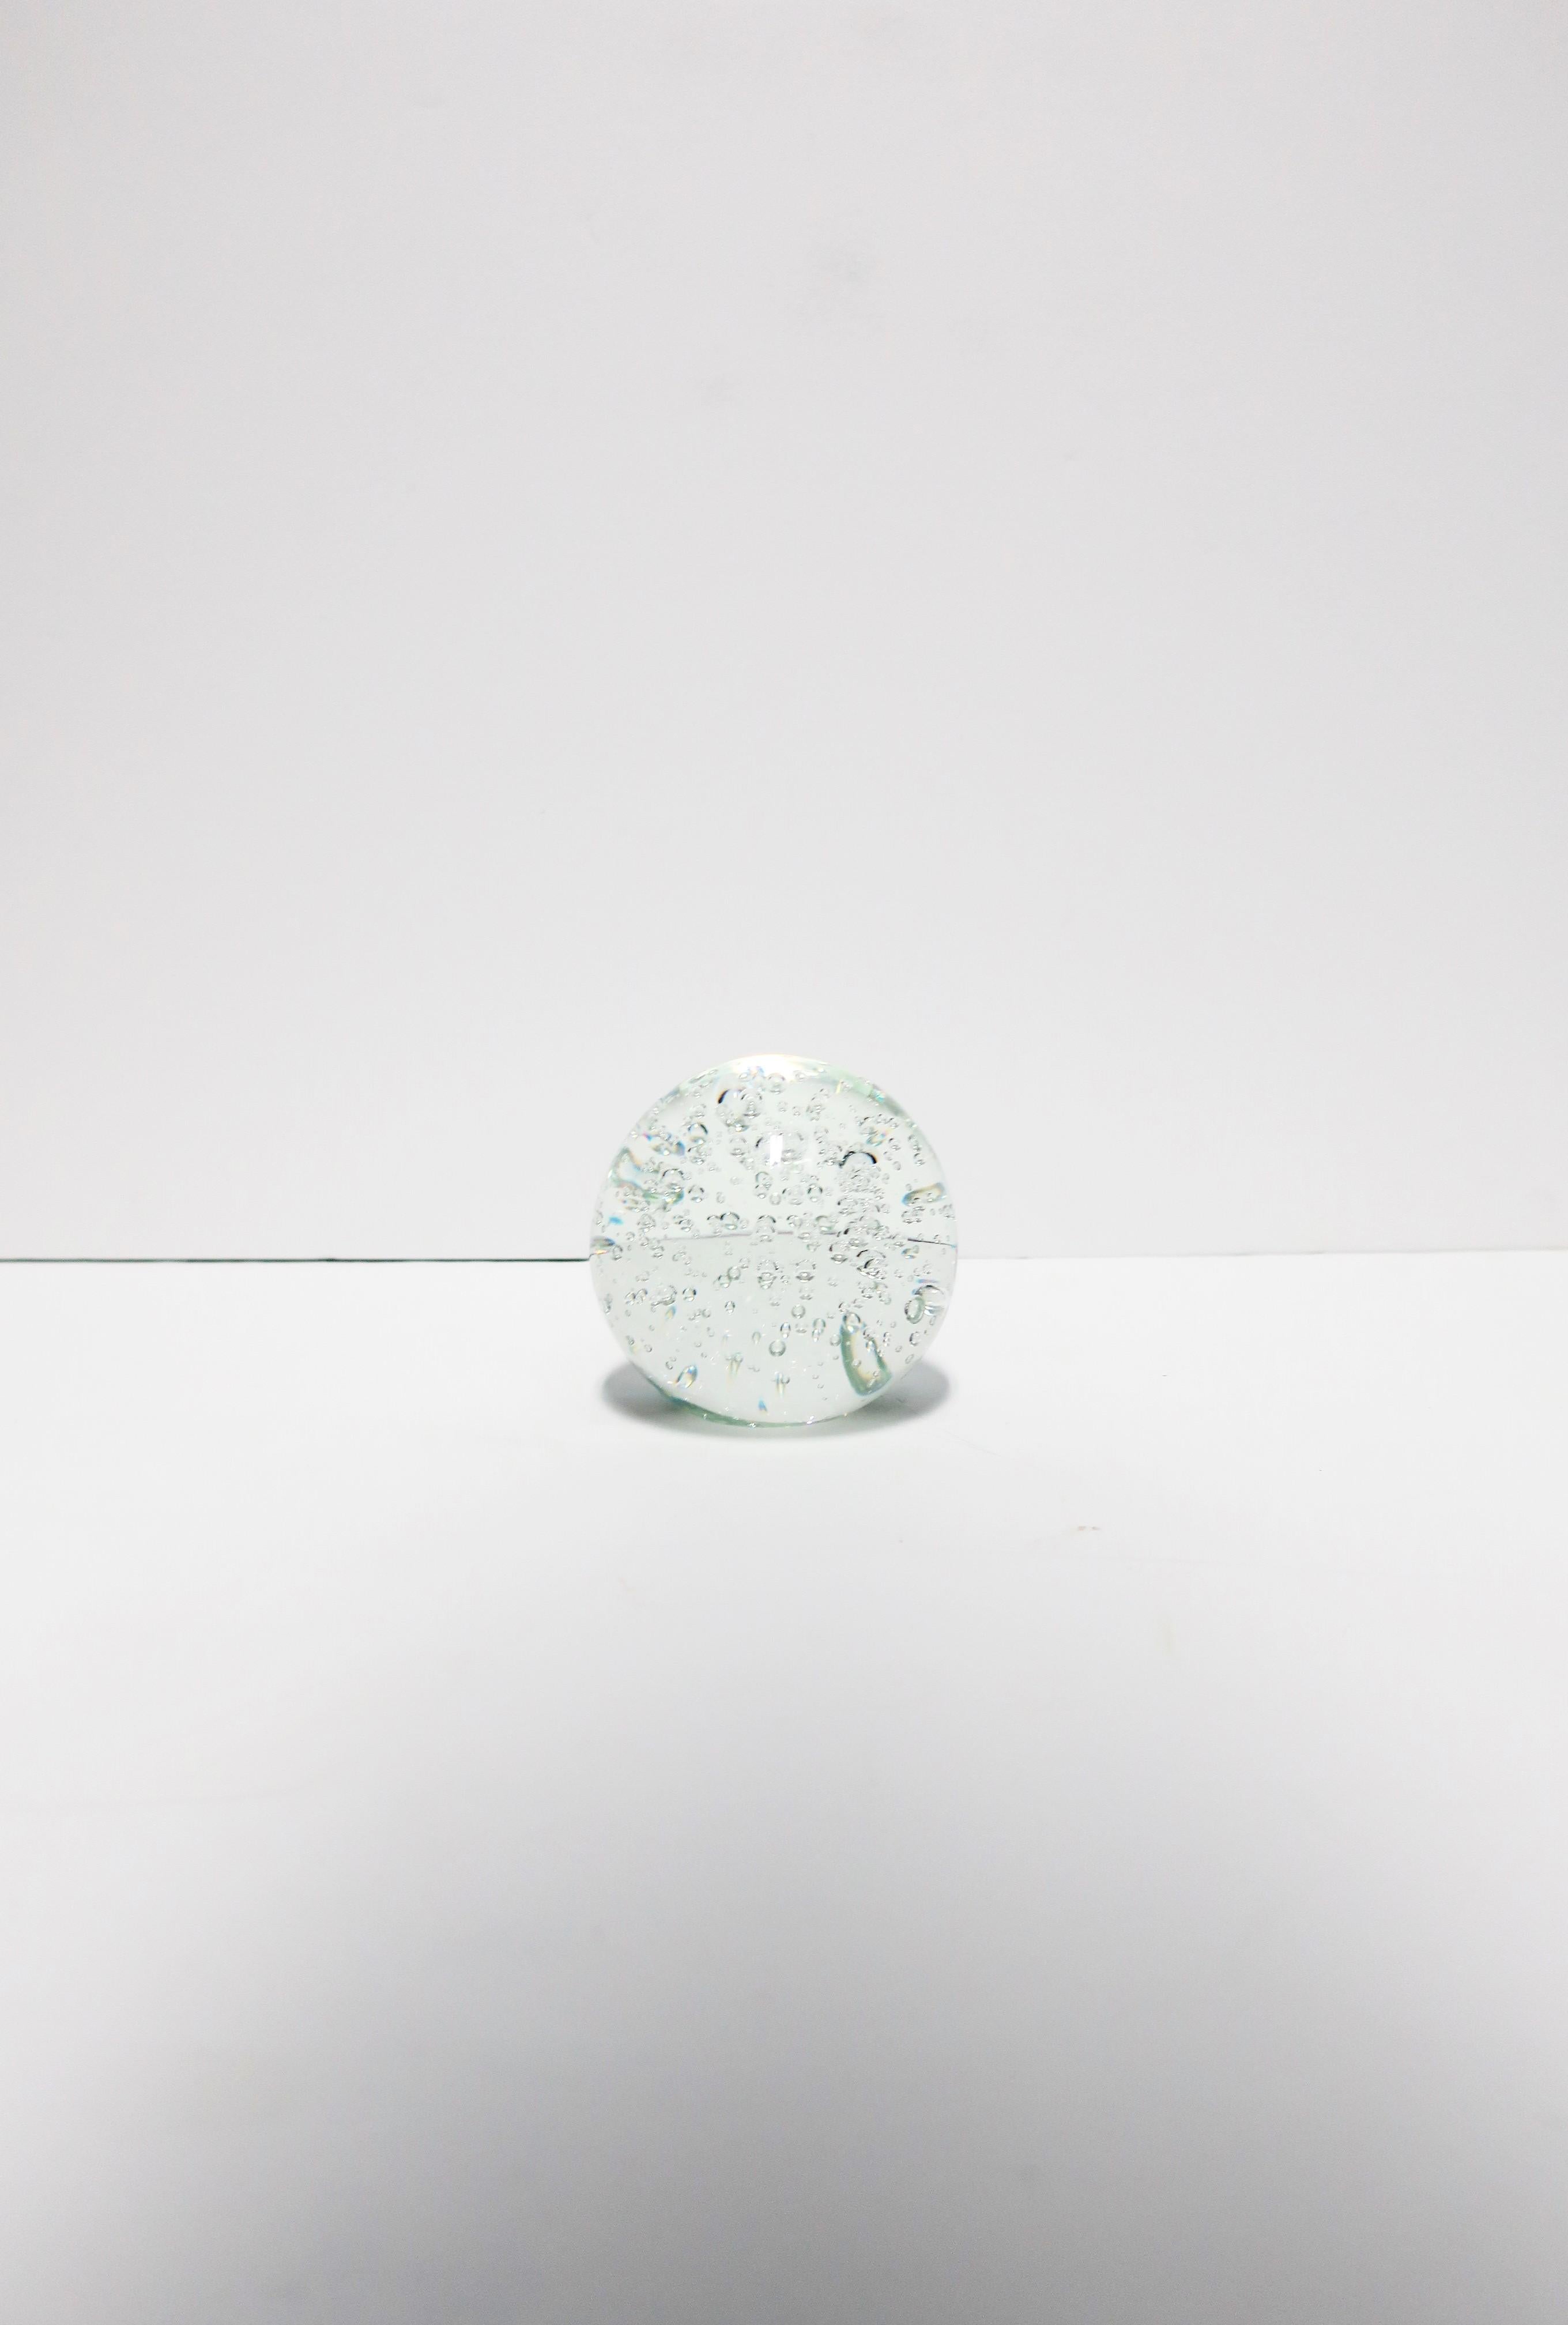 Modern Crystal Ball Sphere with Bubble Design